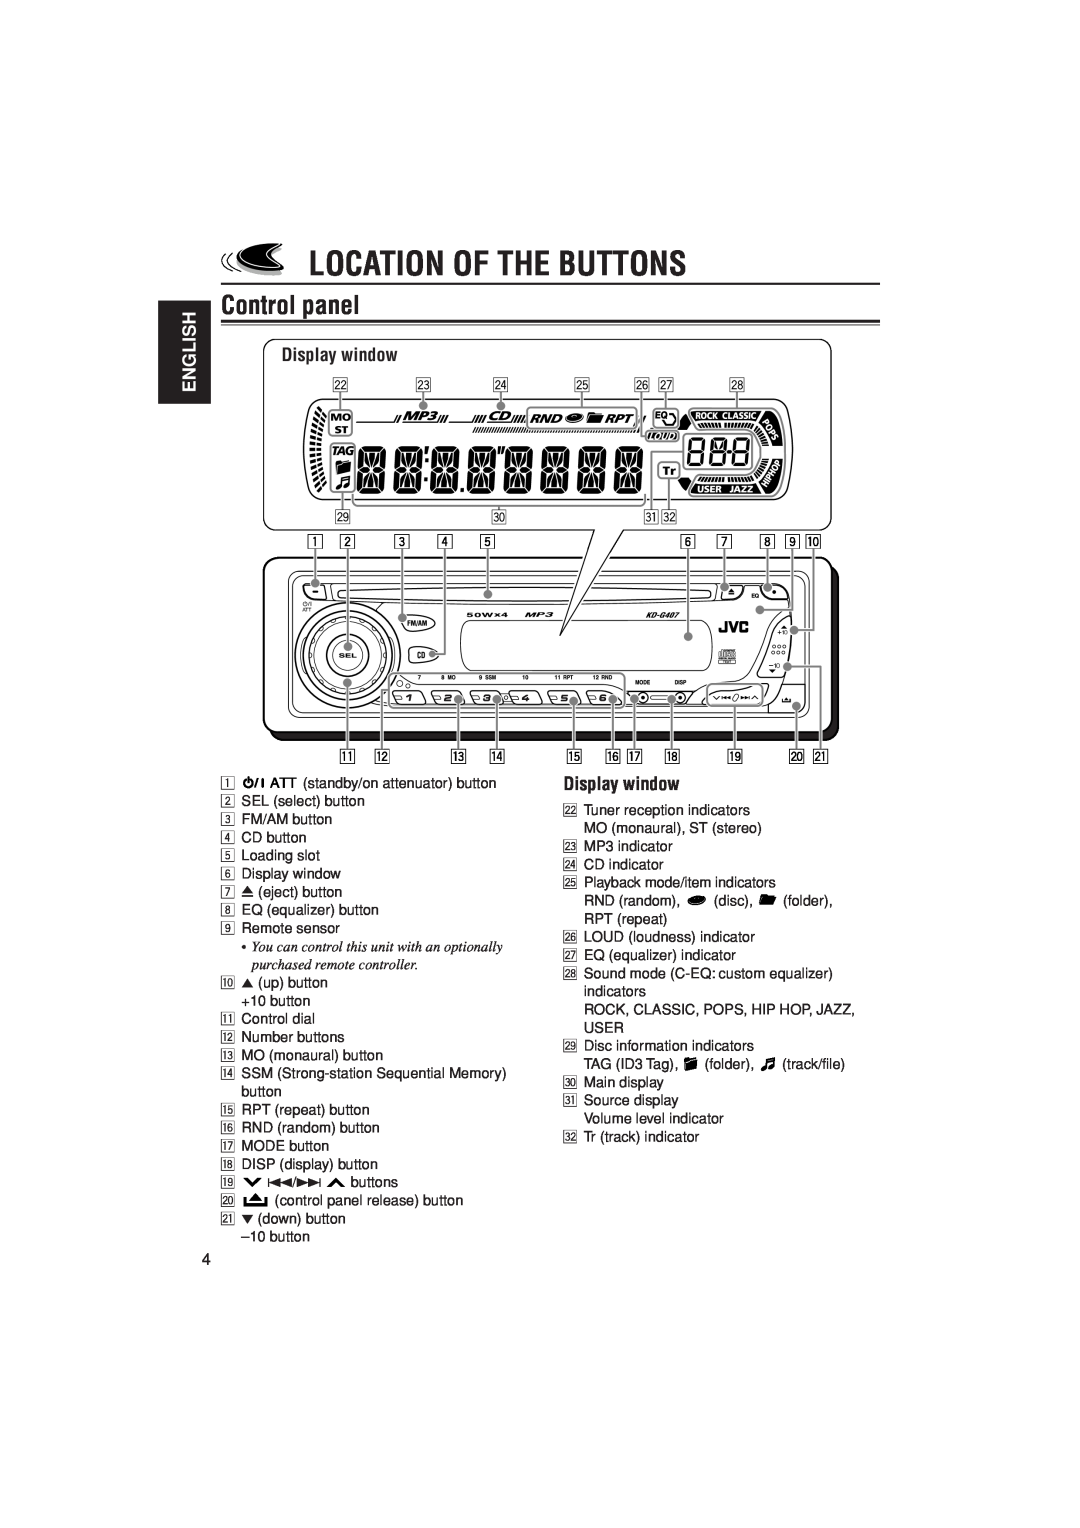 JVC KD-G407 manual Location Of The Buttons, Control panel, Display window, English 